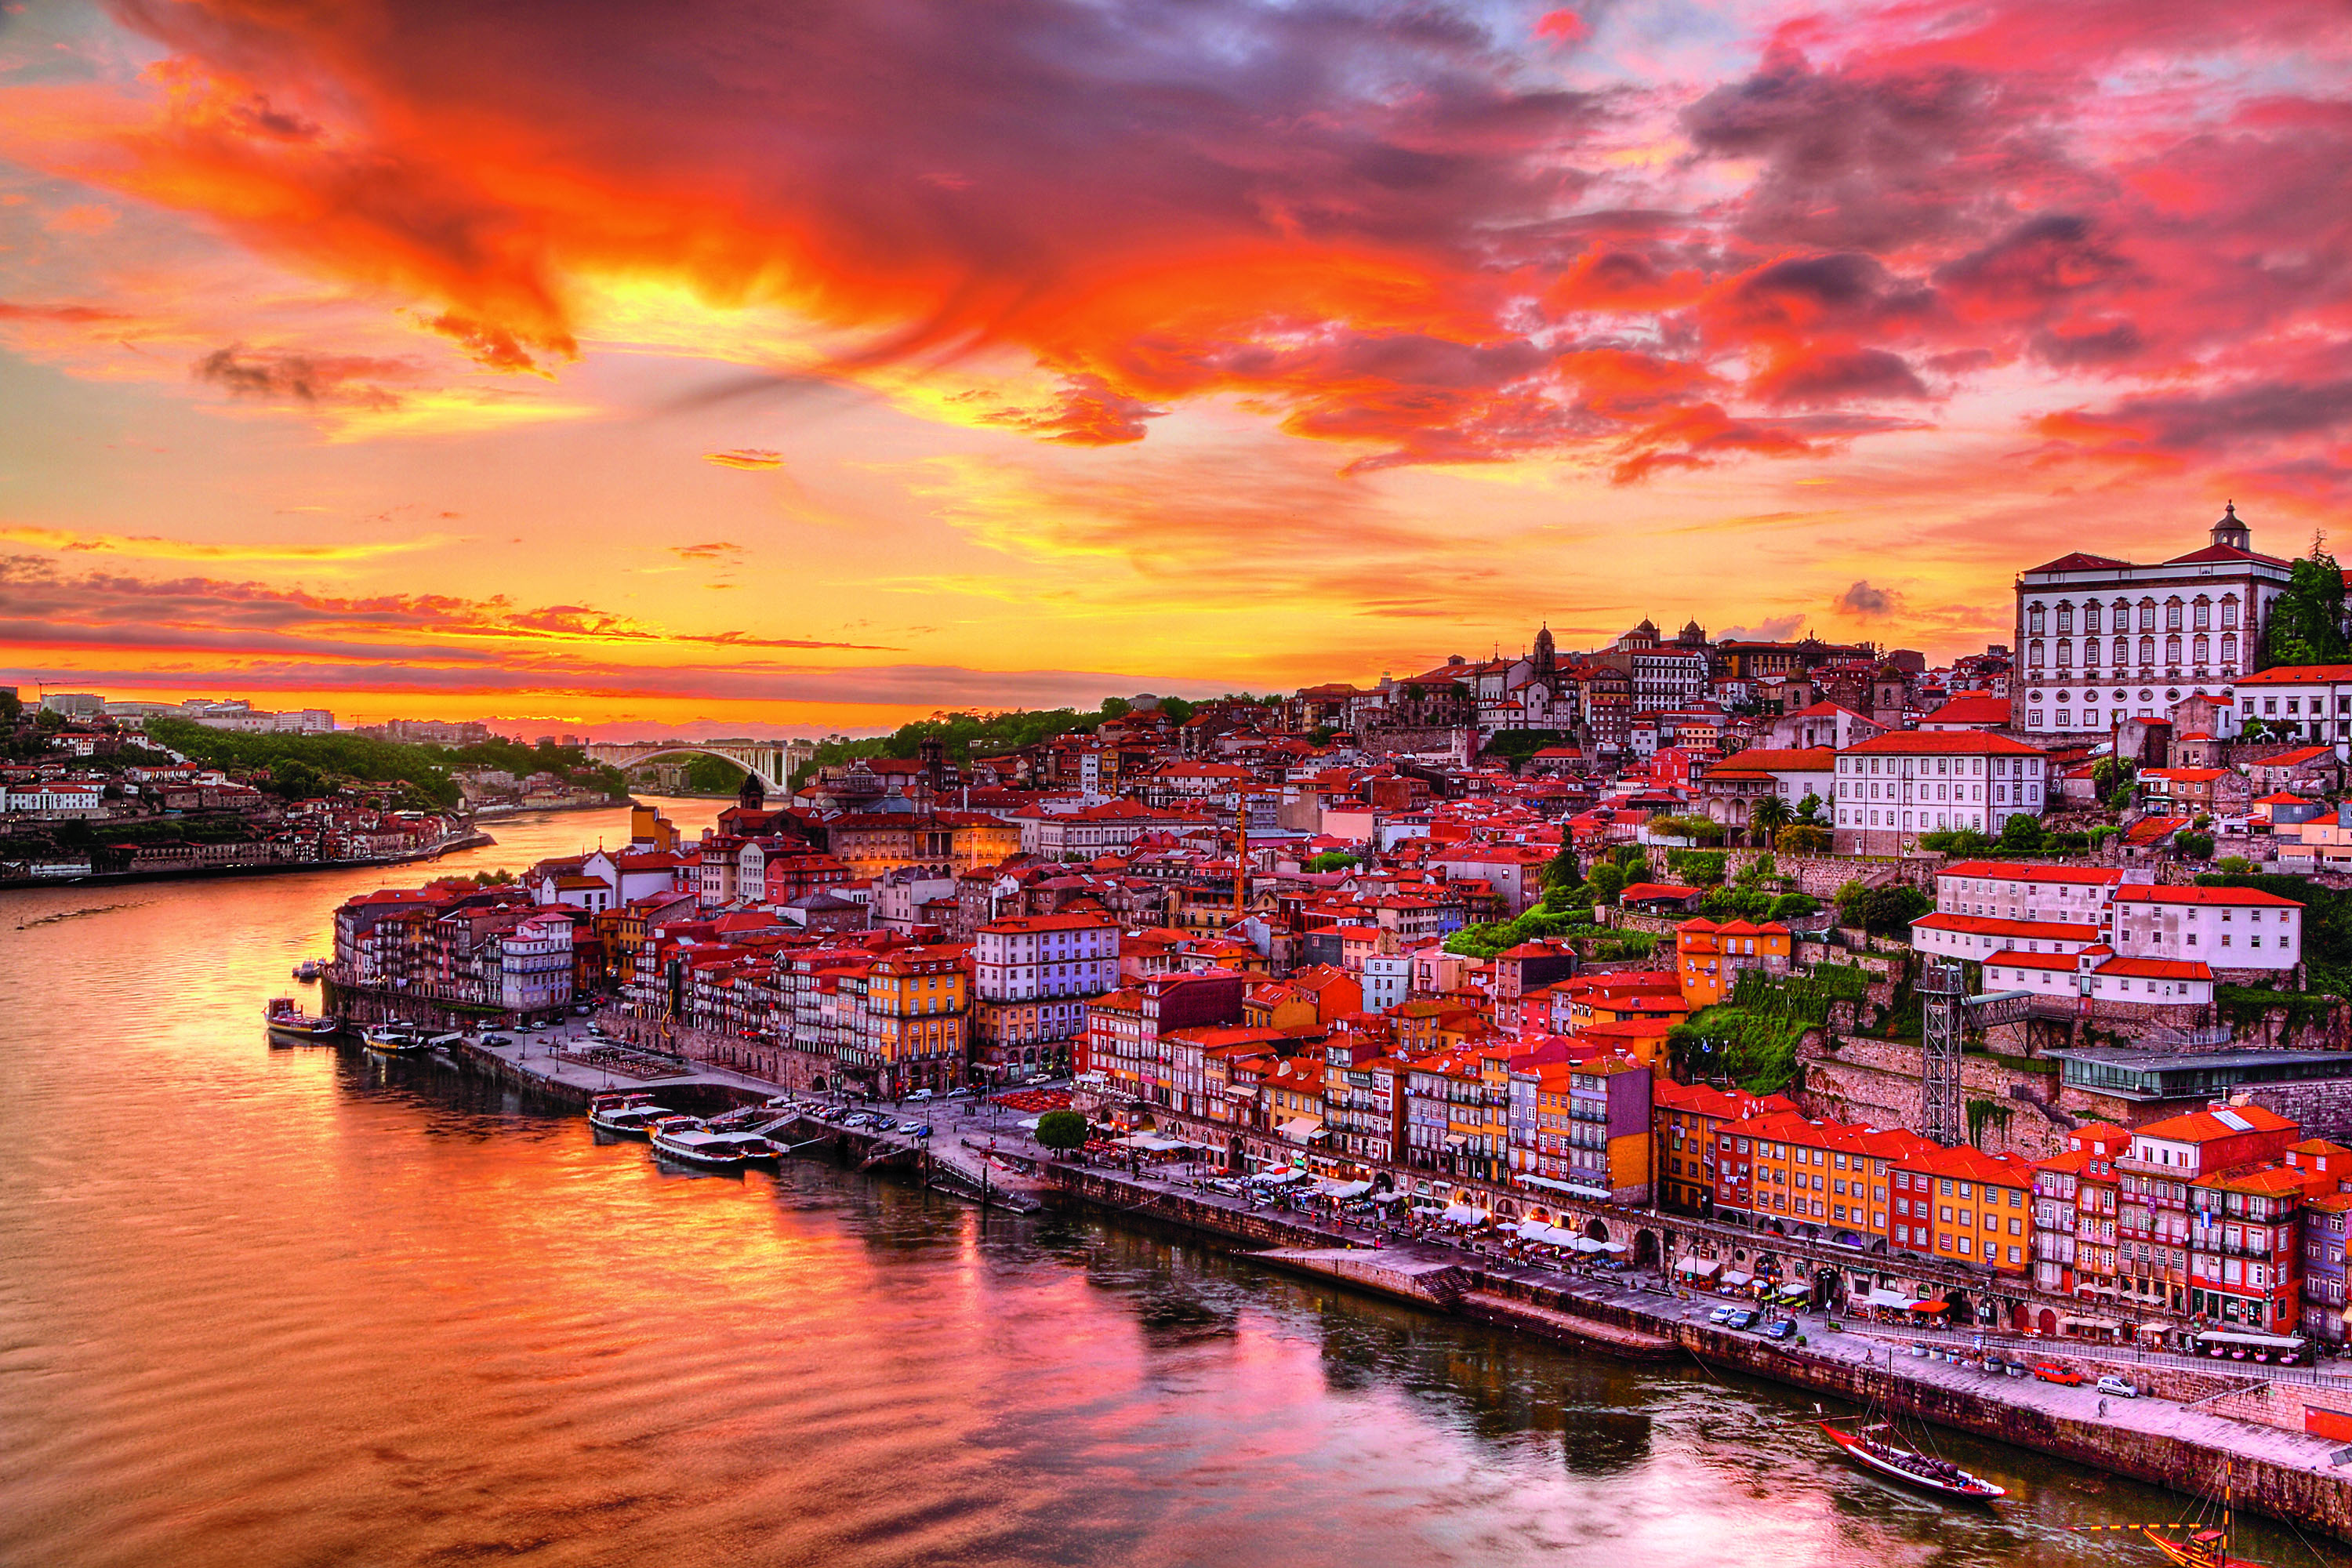 portugal, house, man made, porto, boat, city, colorful, sunset, cities